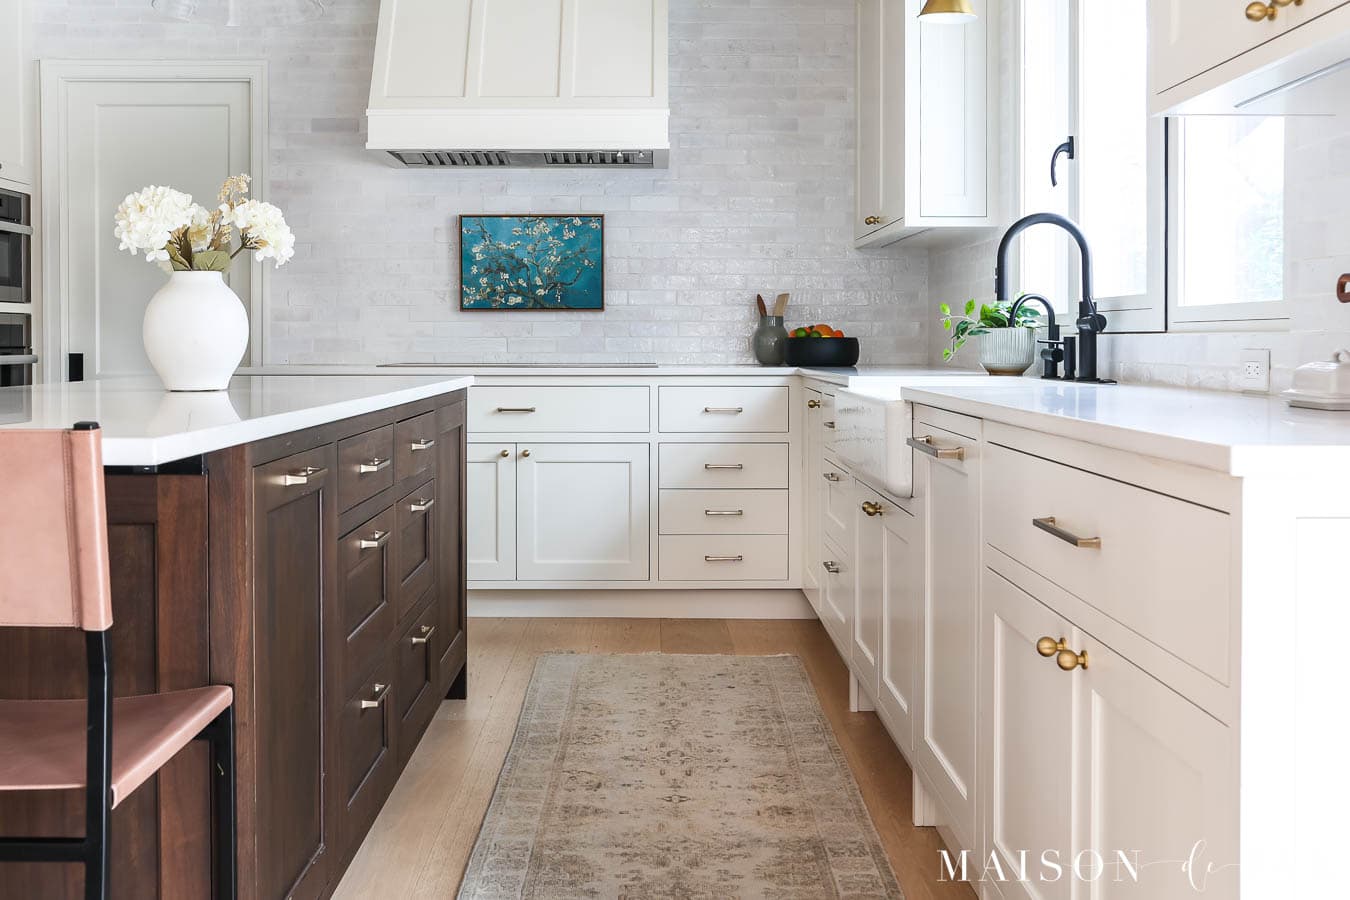 white inset cabinets: flat panel drawers with shaker cabinet doors with decorative bead and dark wood island to match